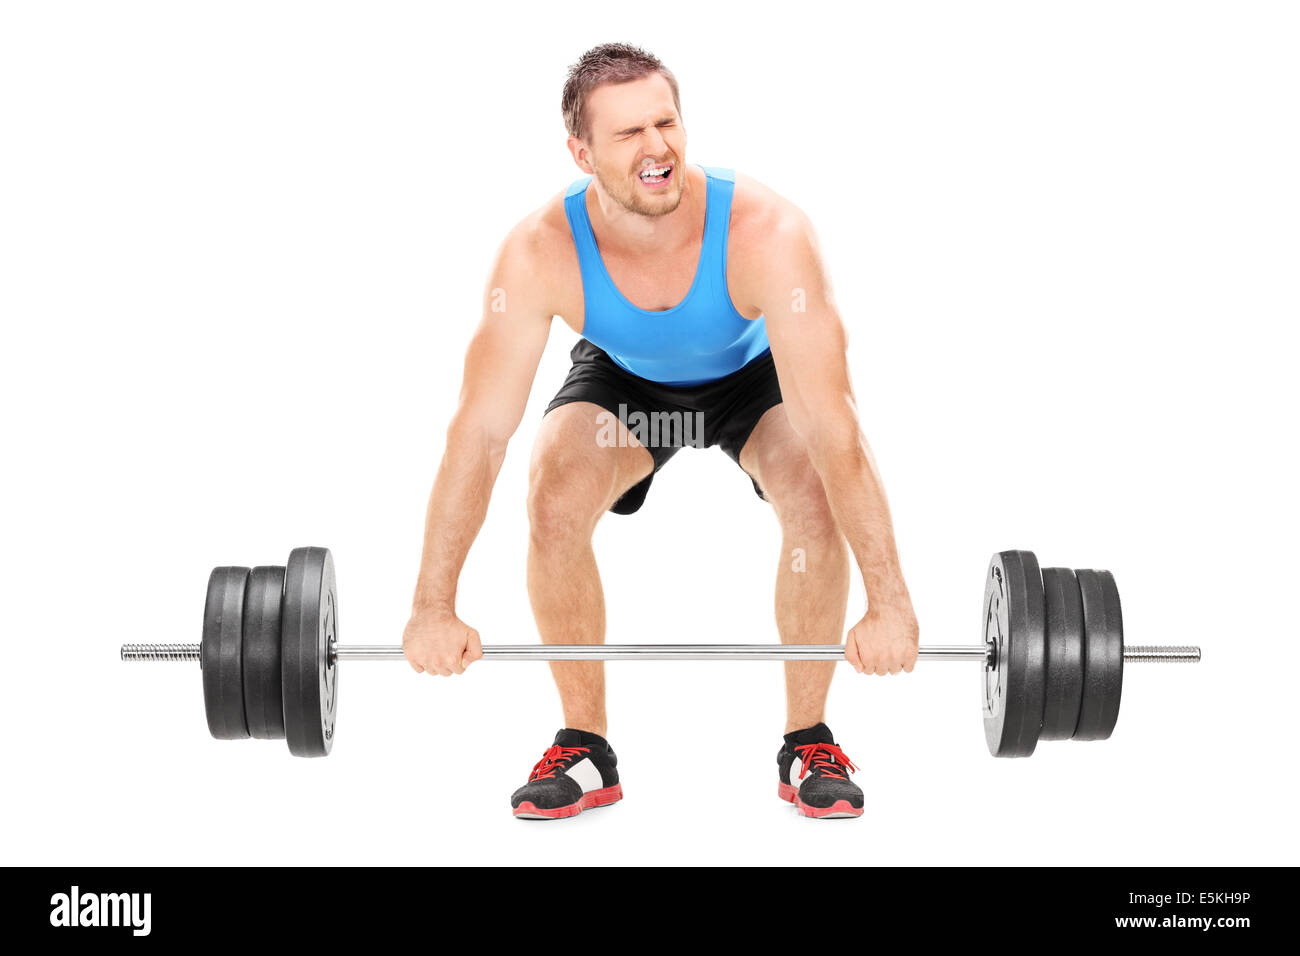 Bodybuilder struggling to lift a barbell Stock Photo